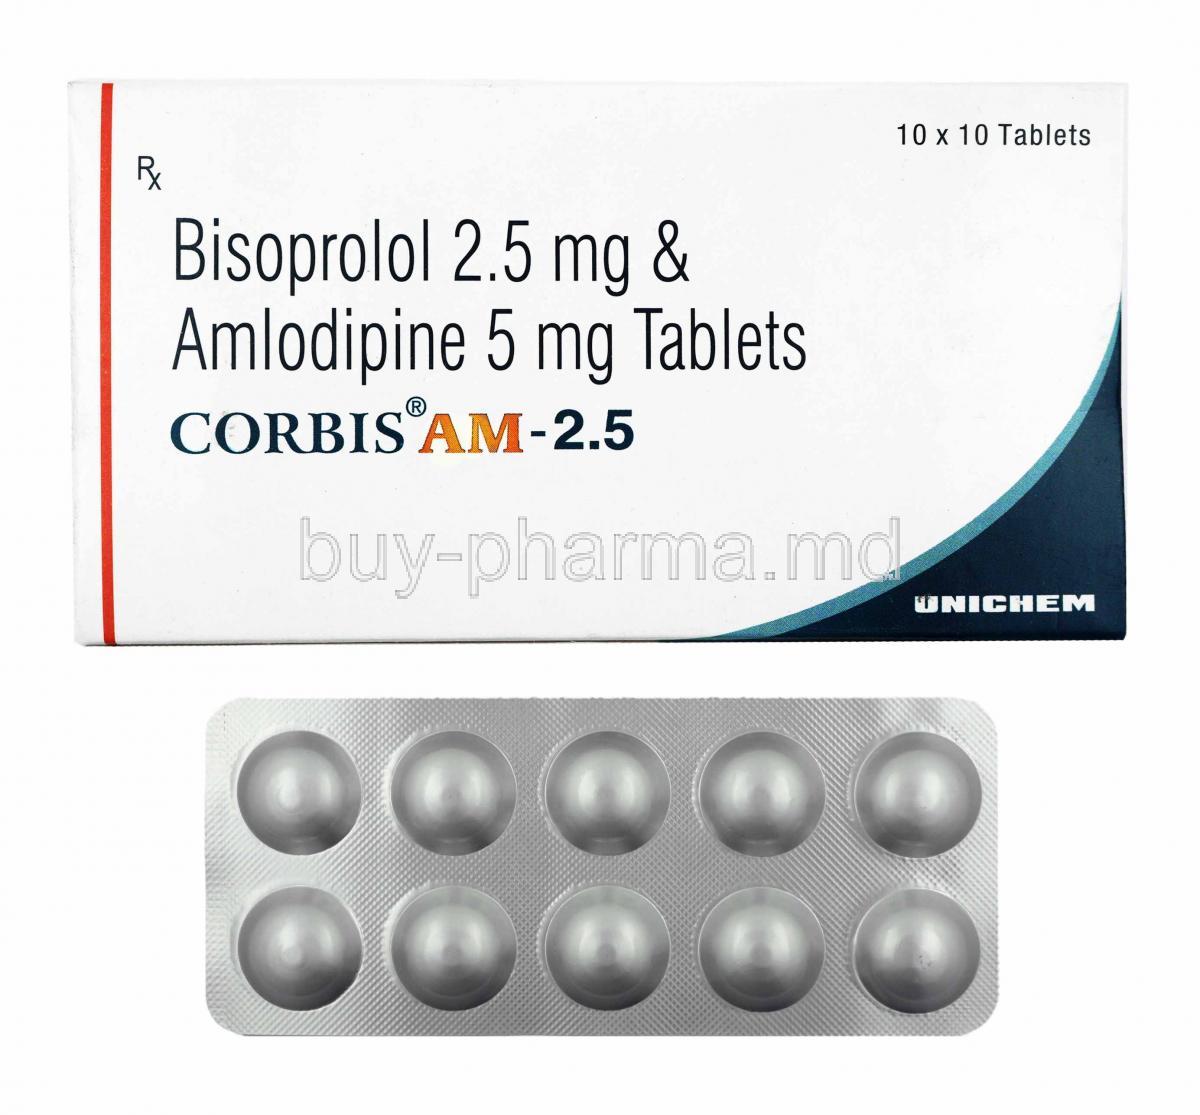 Corbis AM, Amlodipine and Bisoprolol 2.5mg box and tablets